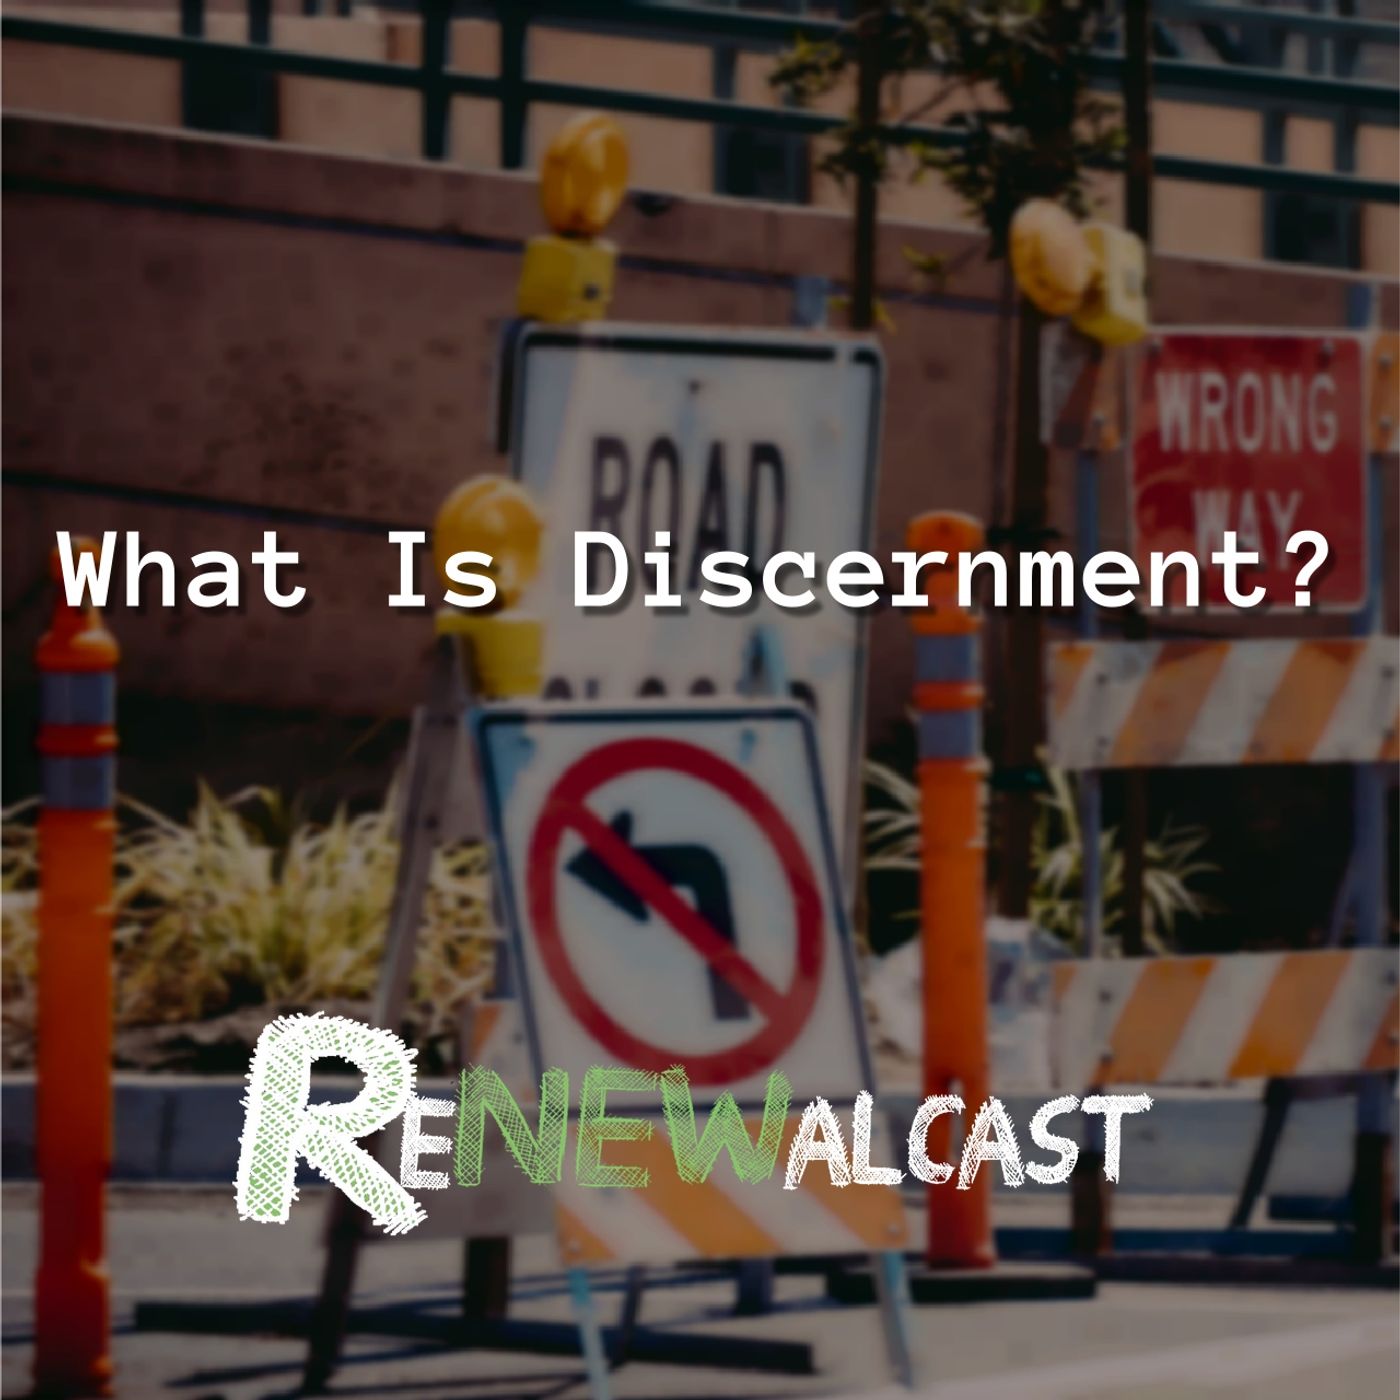 What Is Discernment?